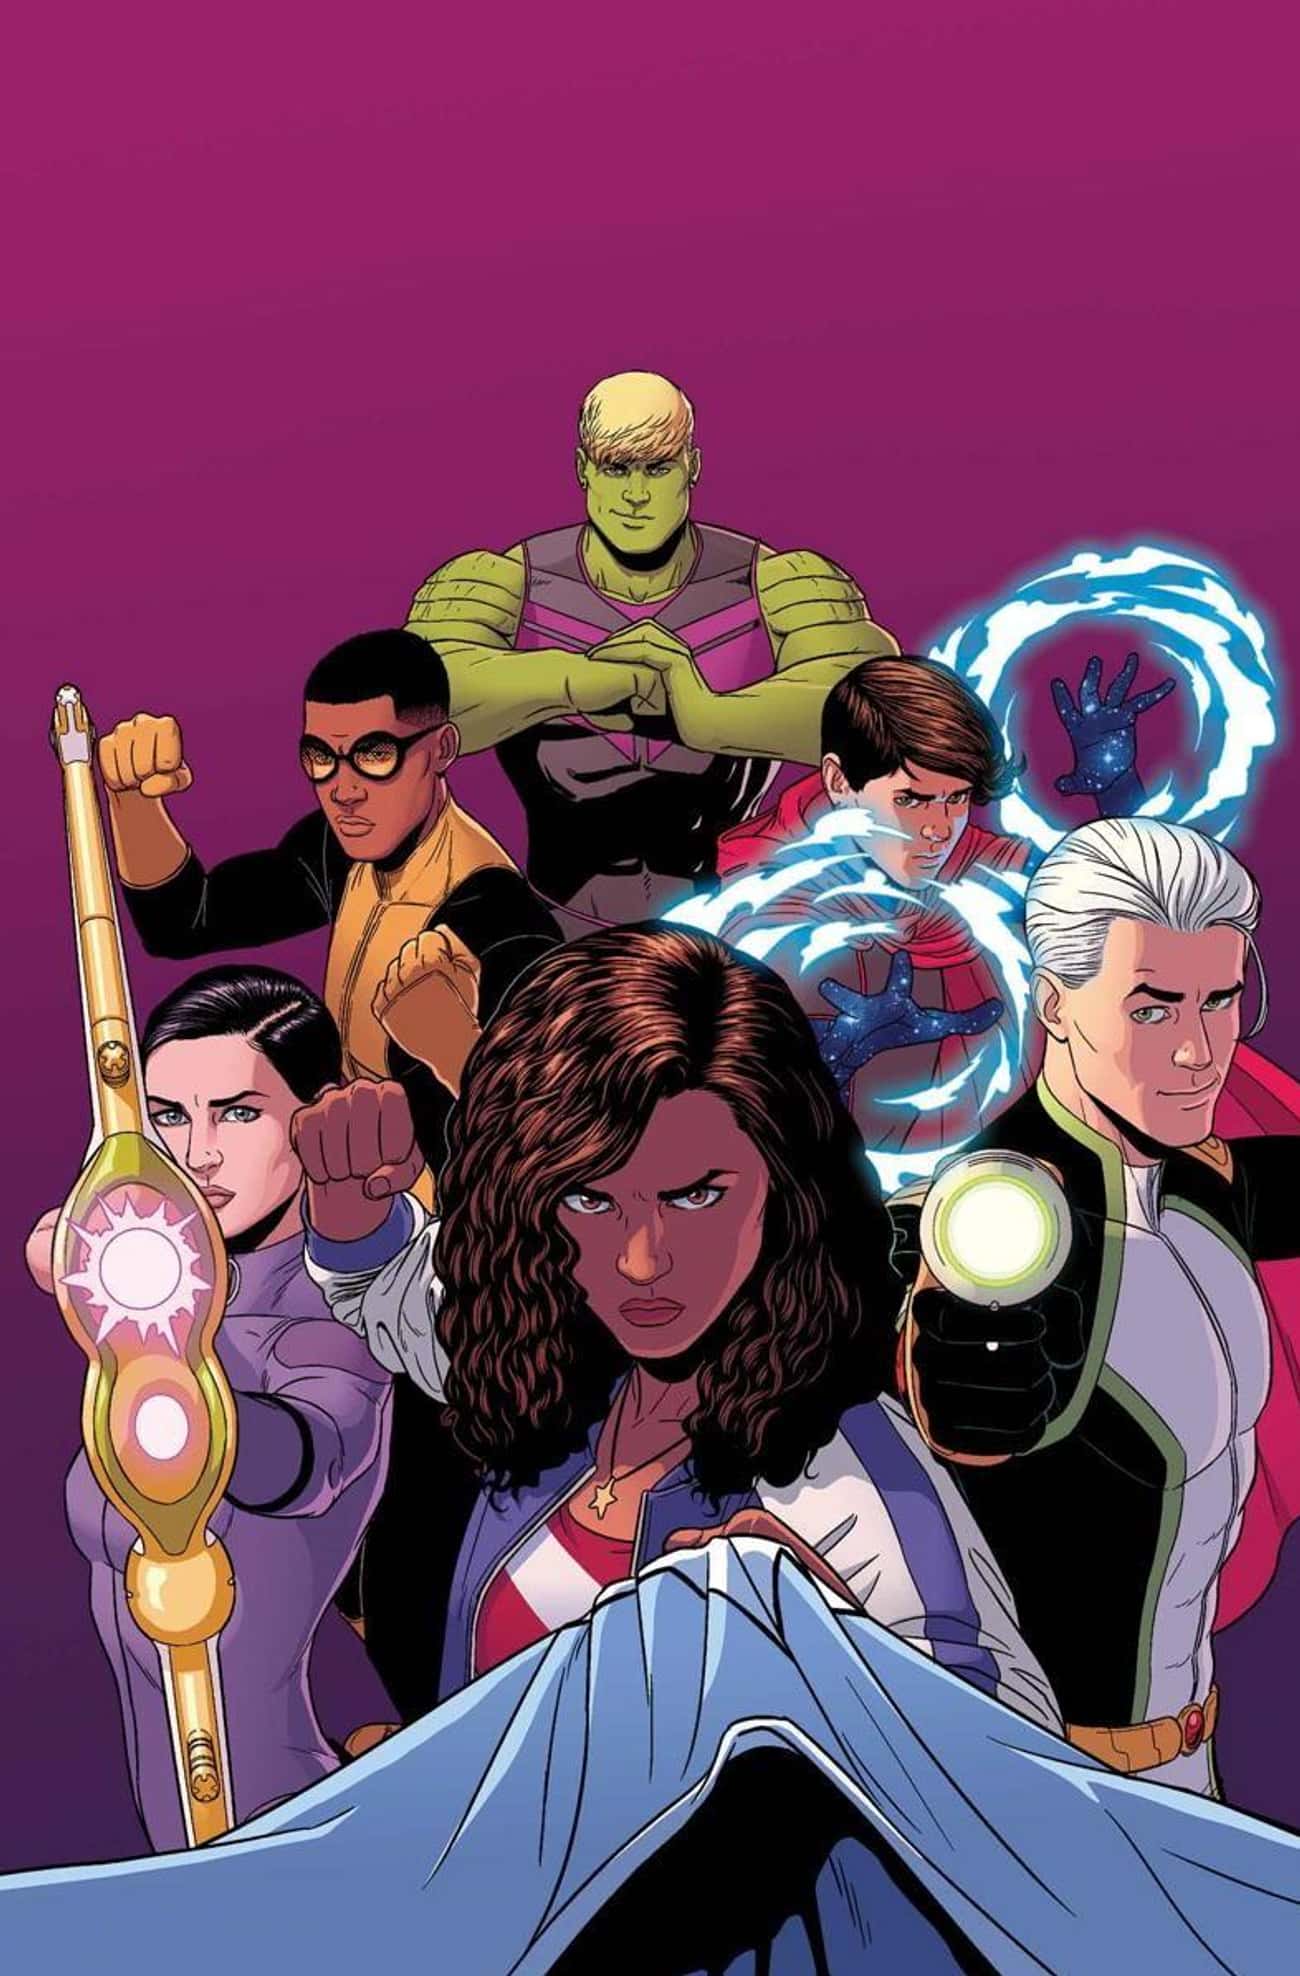 Young Avengers (Vol. 1 and 2)